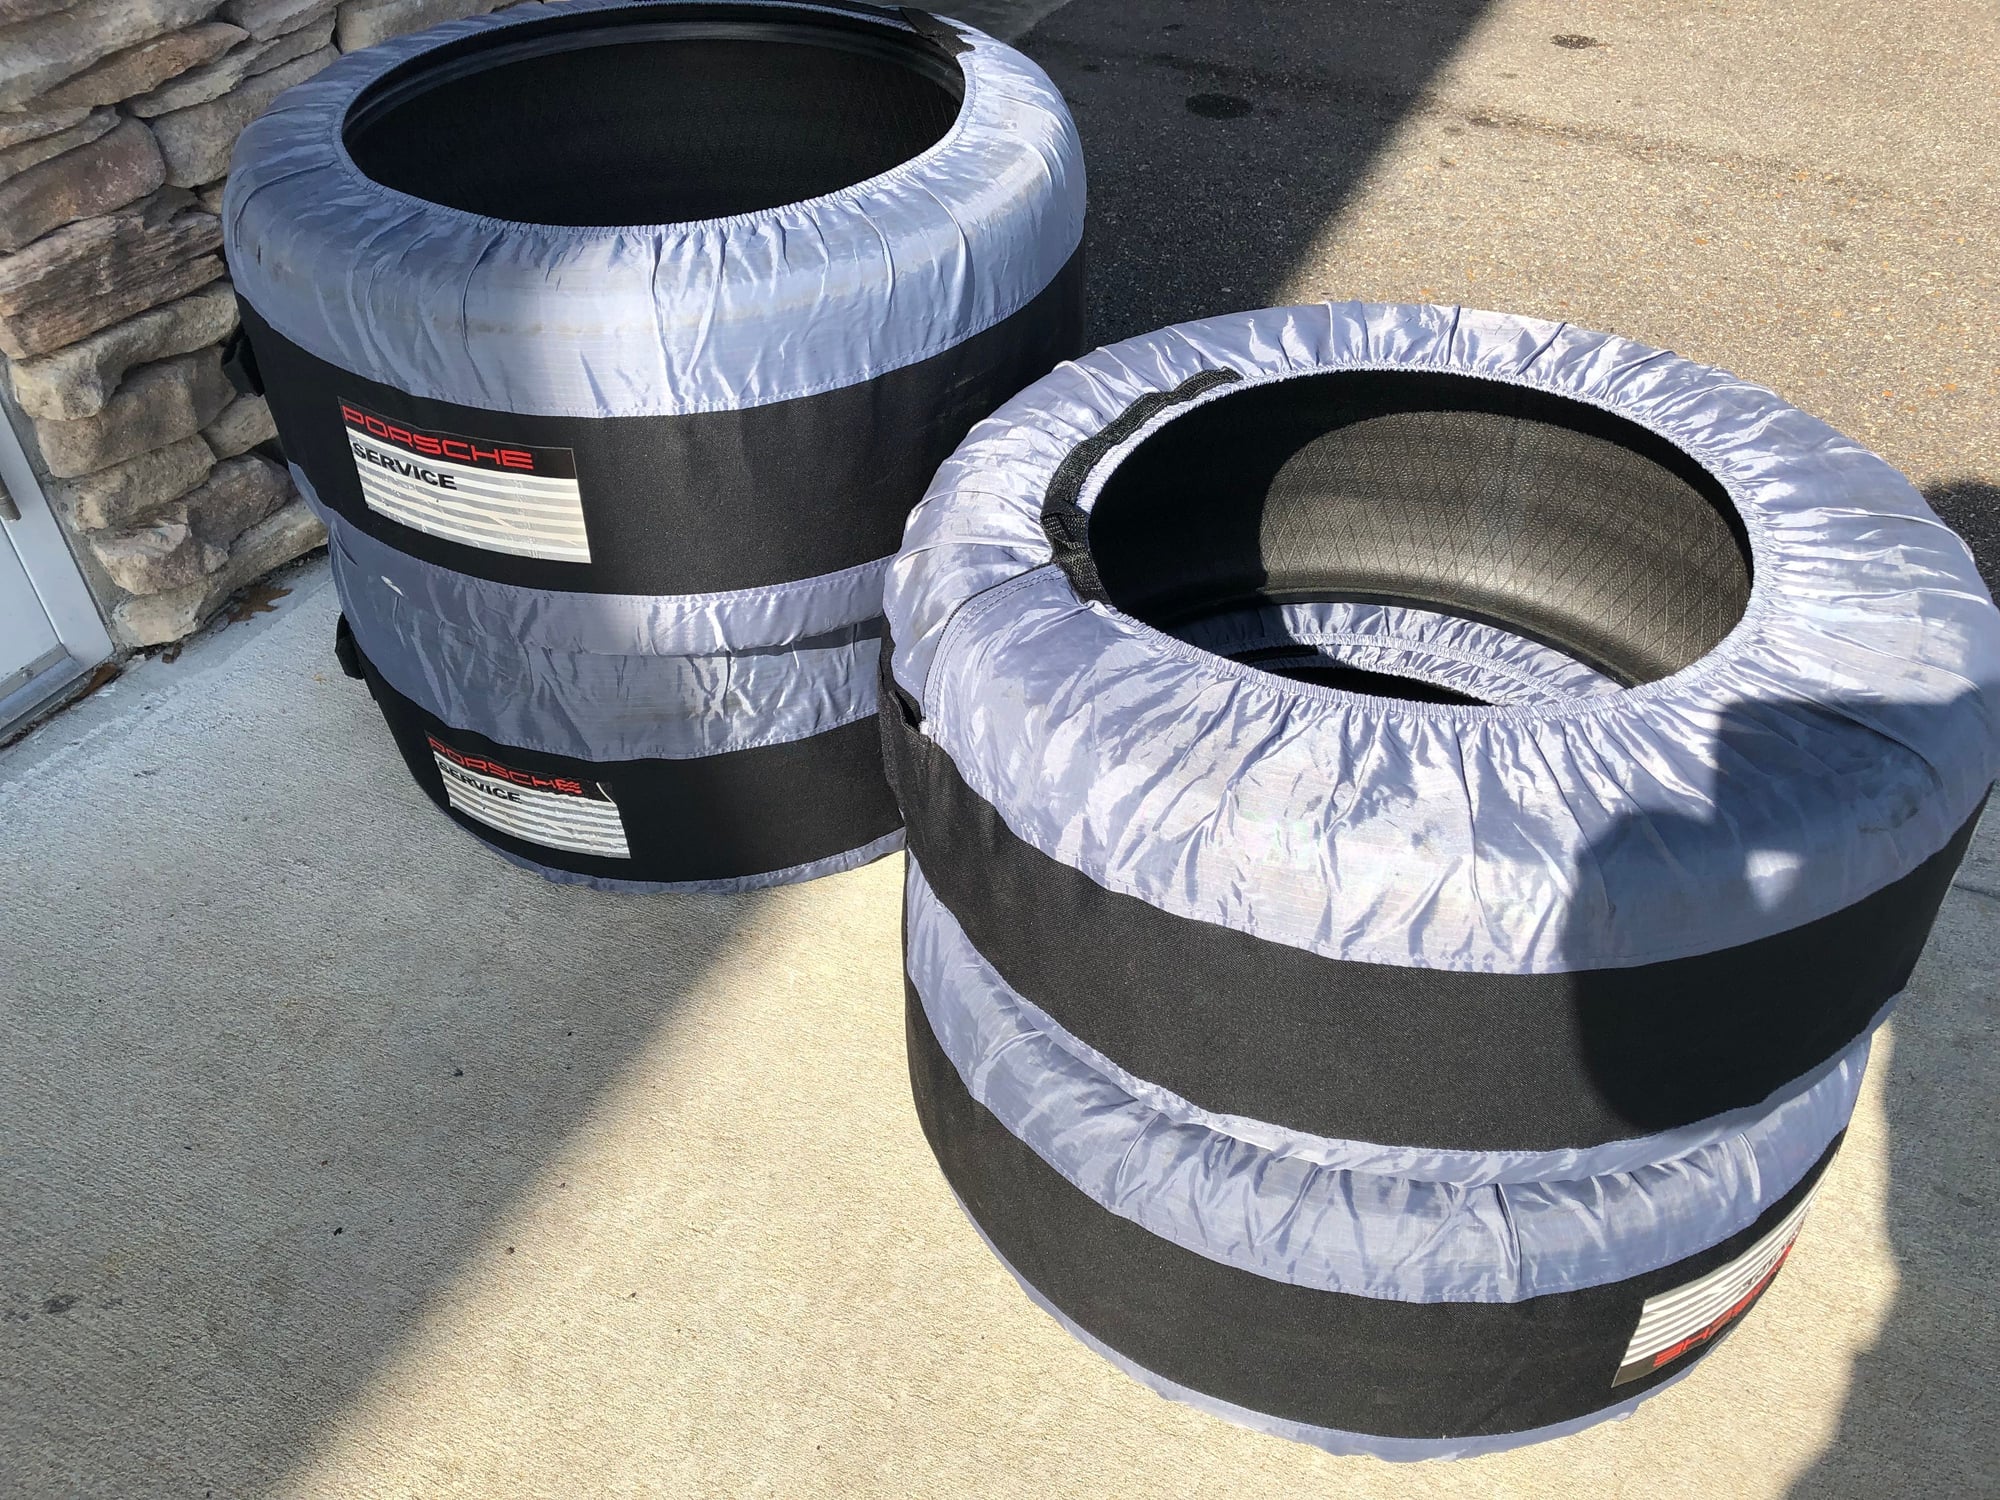 Wheels and Tires/Axles - Set of Dunlop Race Maxx tires - Used - 2015 to 2019 Jaguar F-Type - Destin, FL 32541, United States